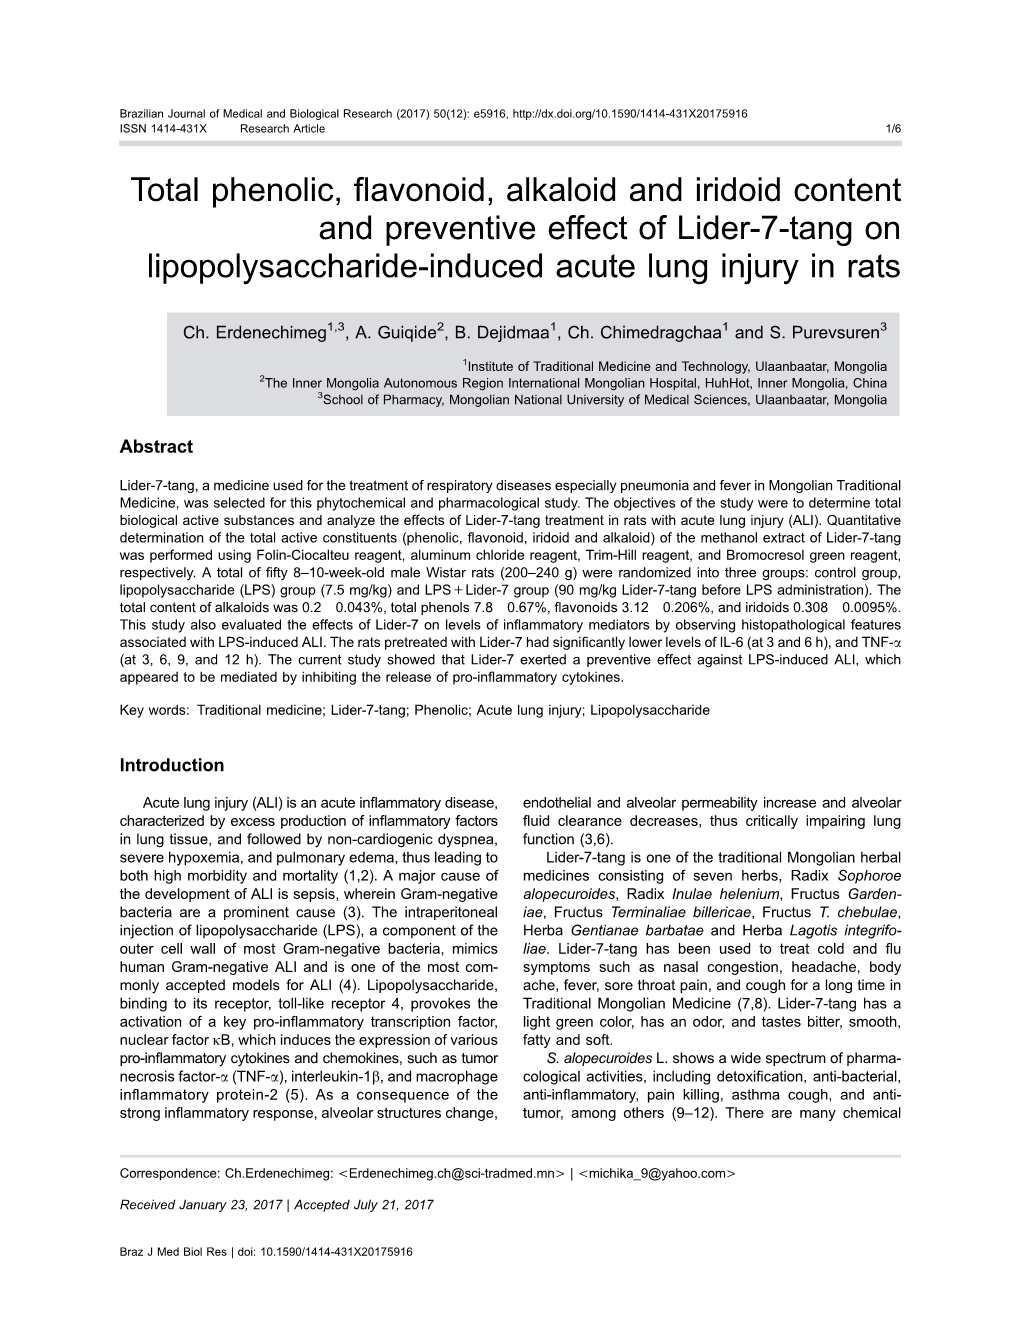 Total Phenolic, Flavonoid, Alkaloid and Iridoid Content And